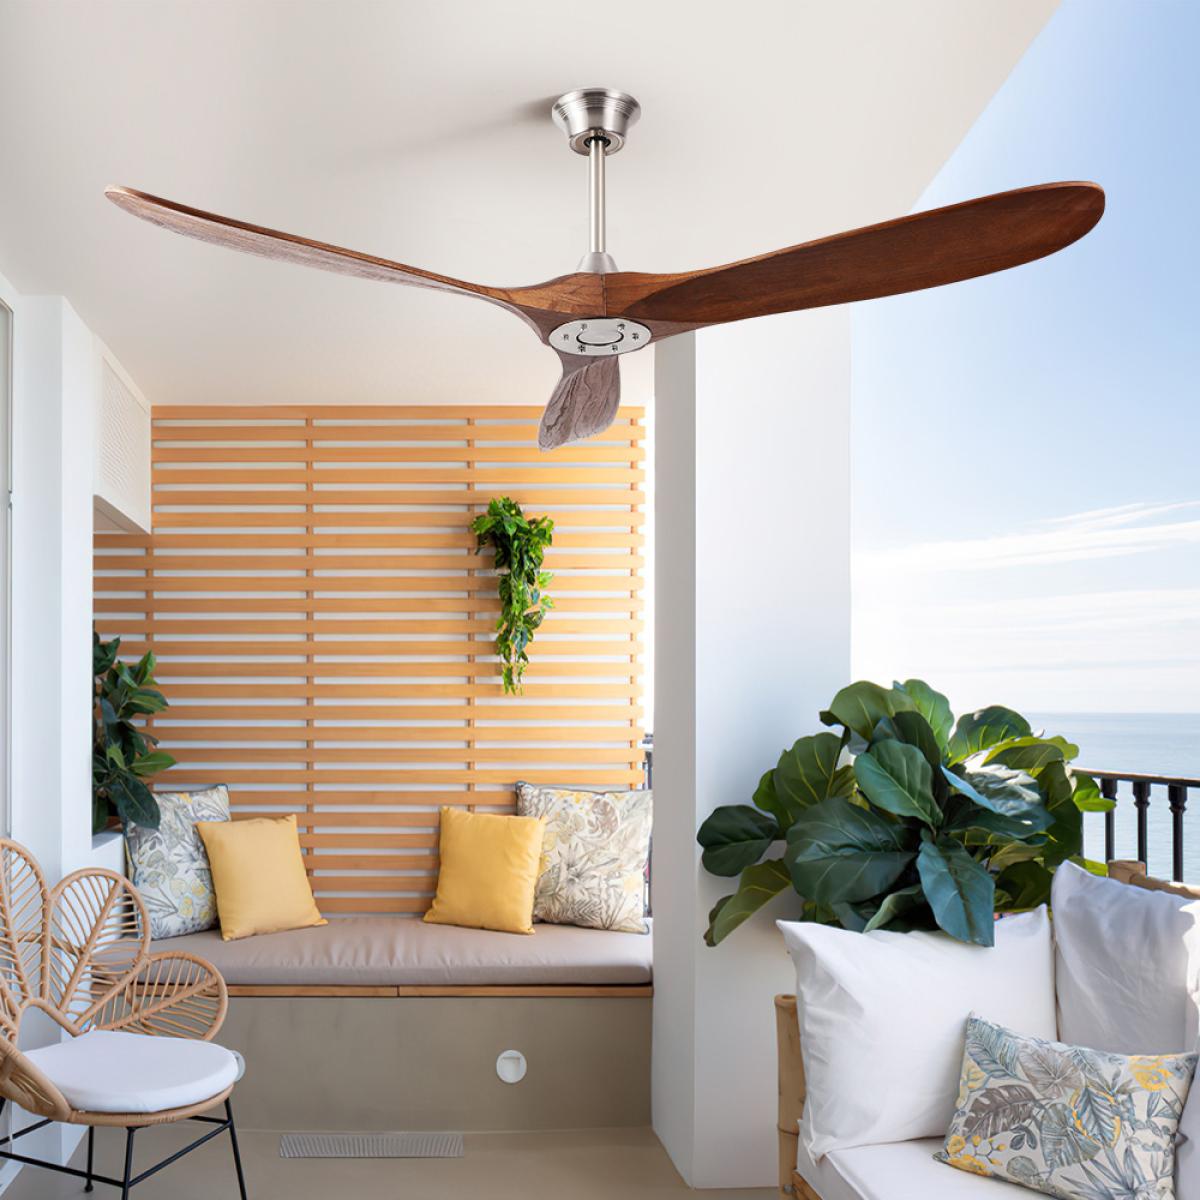 60 Inch Indoor Wood Ceiling Fan With 3 Solid Wood Blades Remote Control Reversible Dc Motor For Living Room